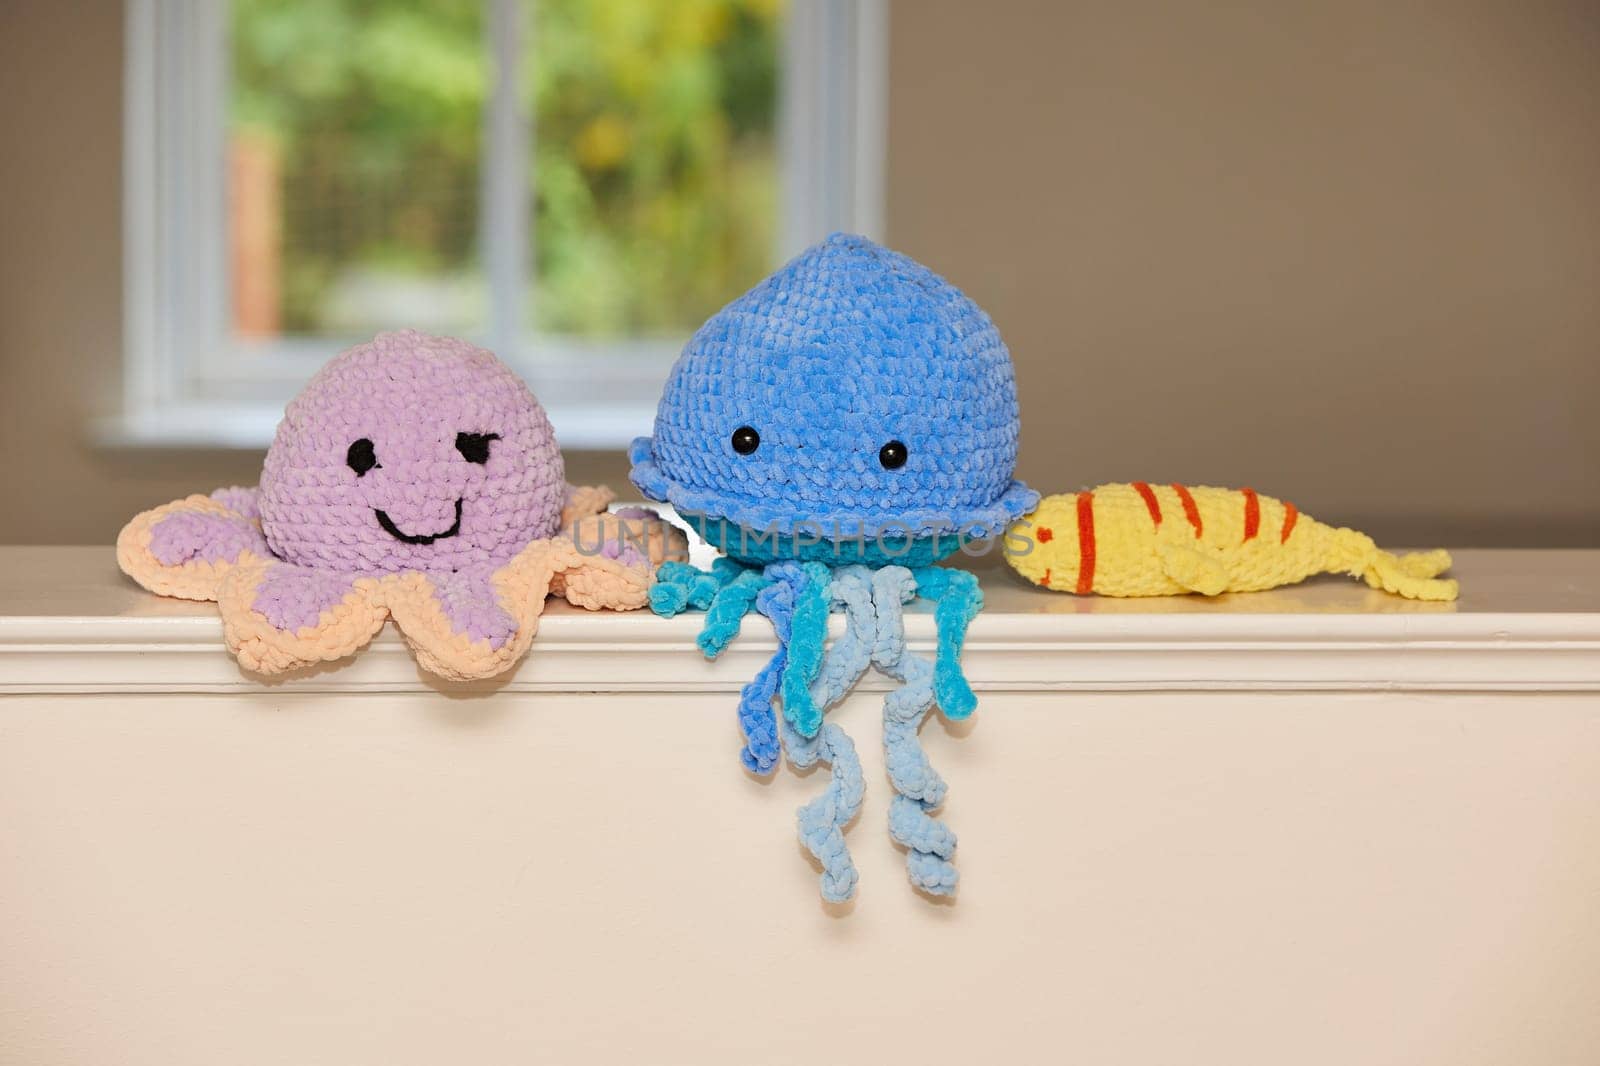 Cute knitted toy octopus, jellyfish and fish at home.